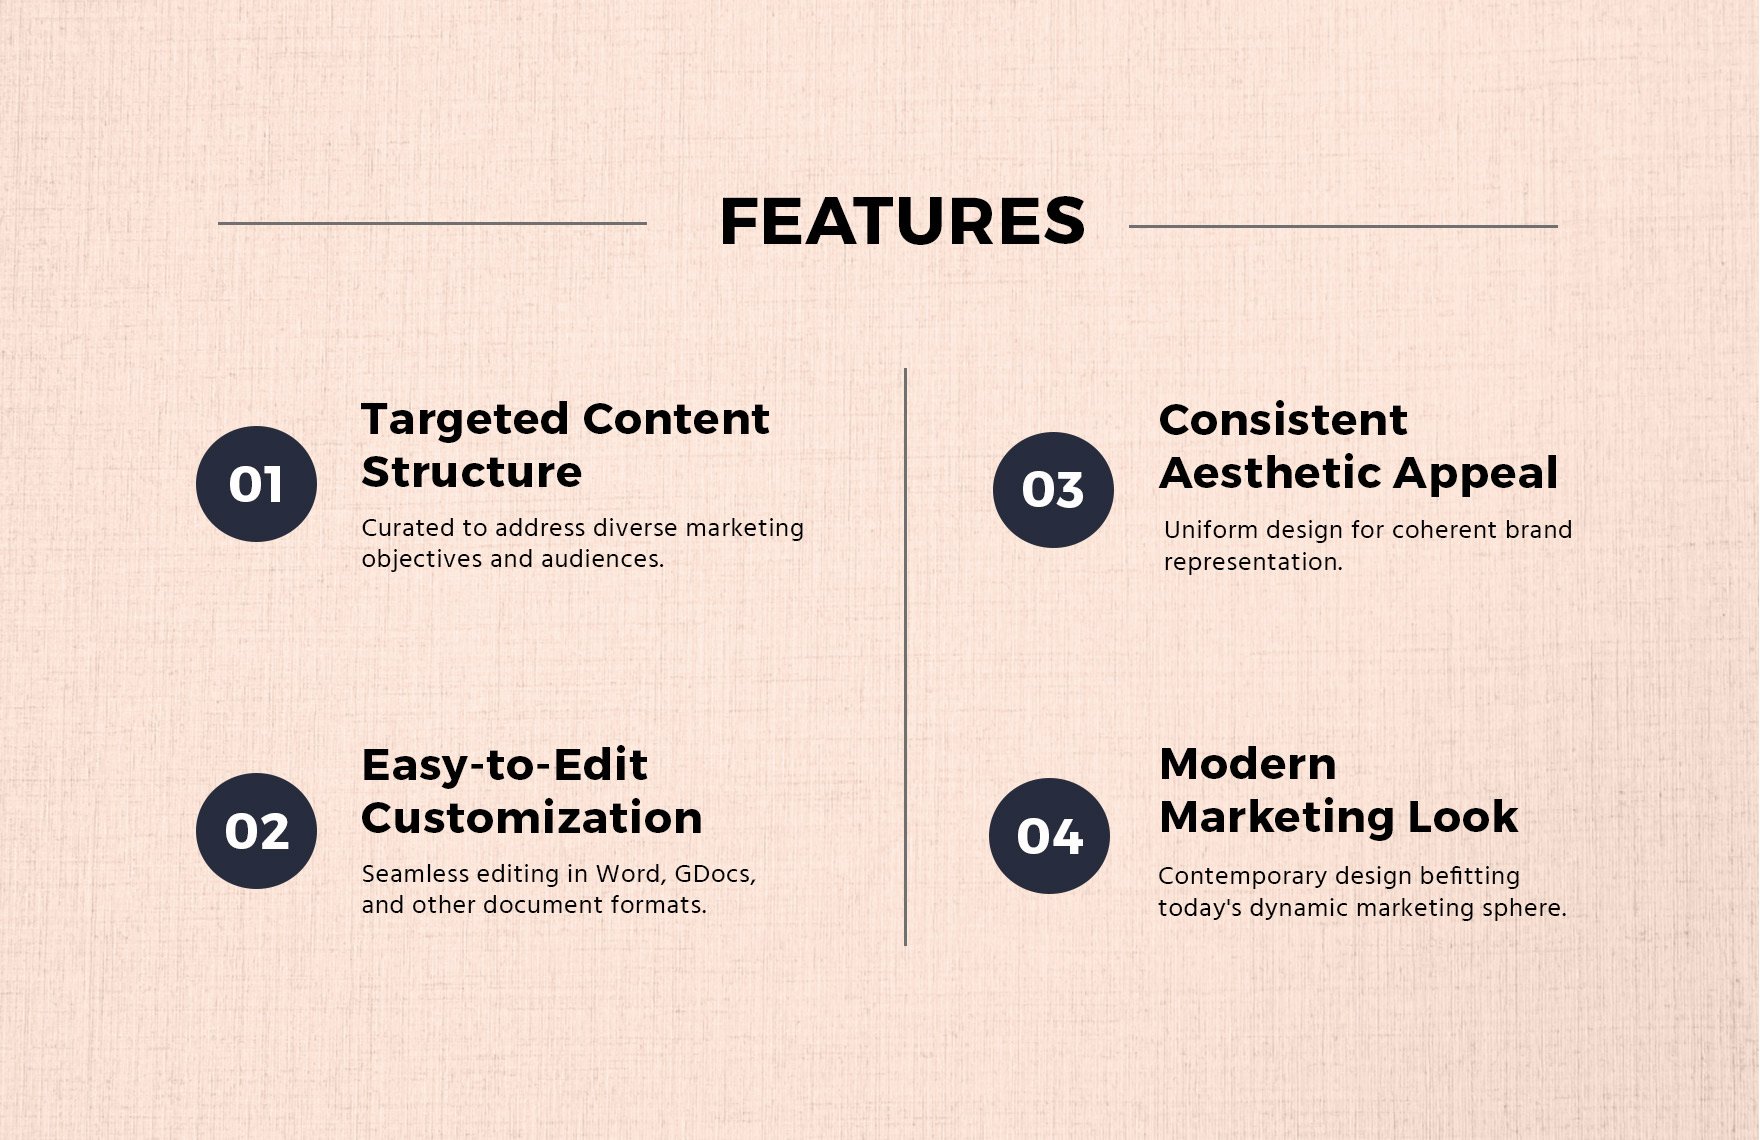 Marketing Annual Content Summary Report Template